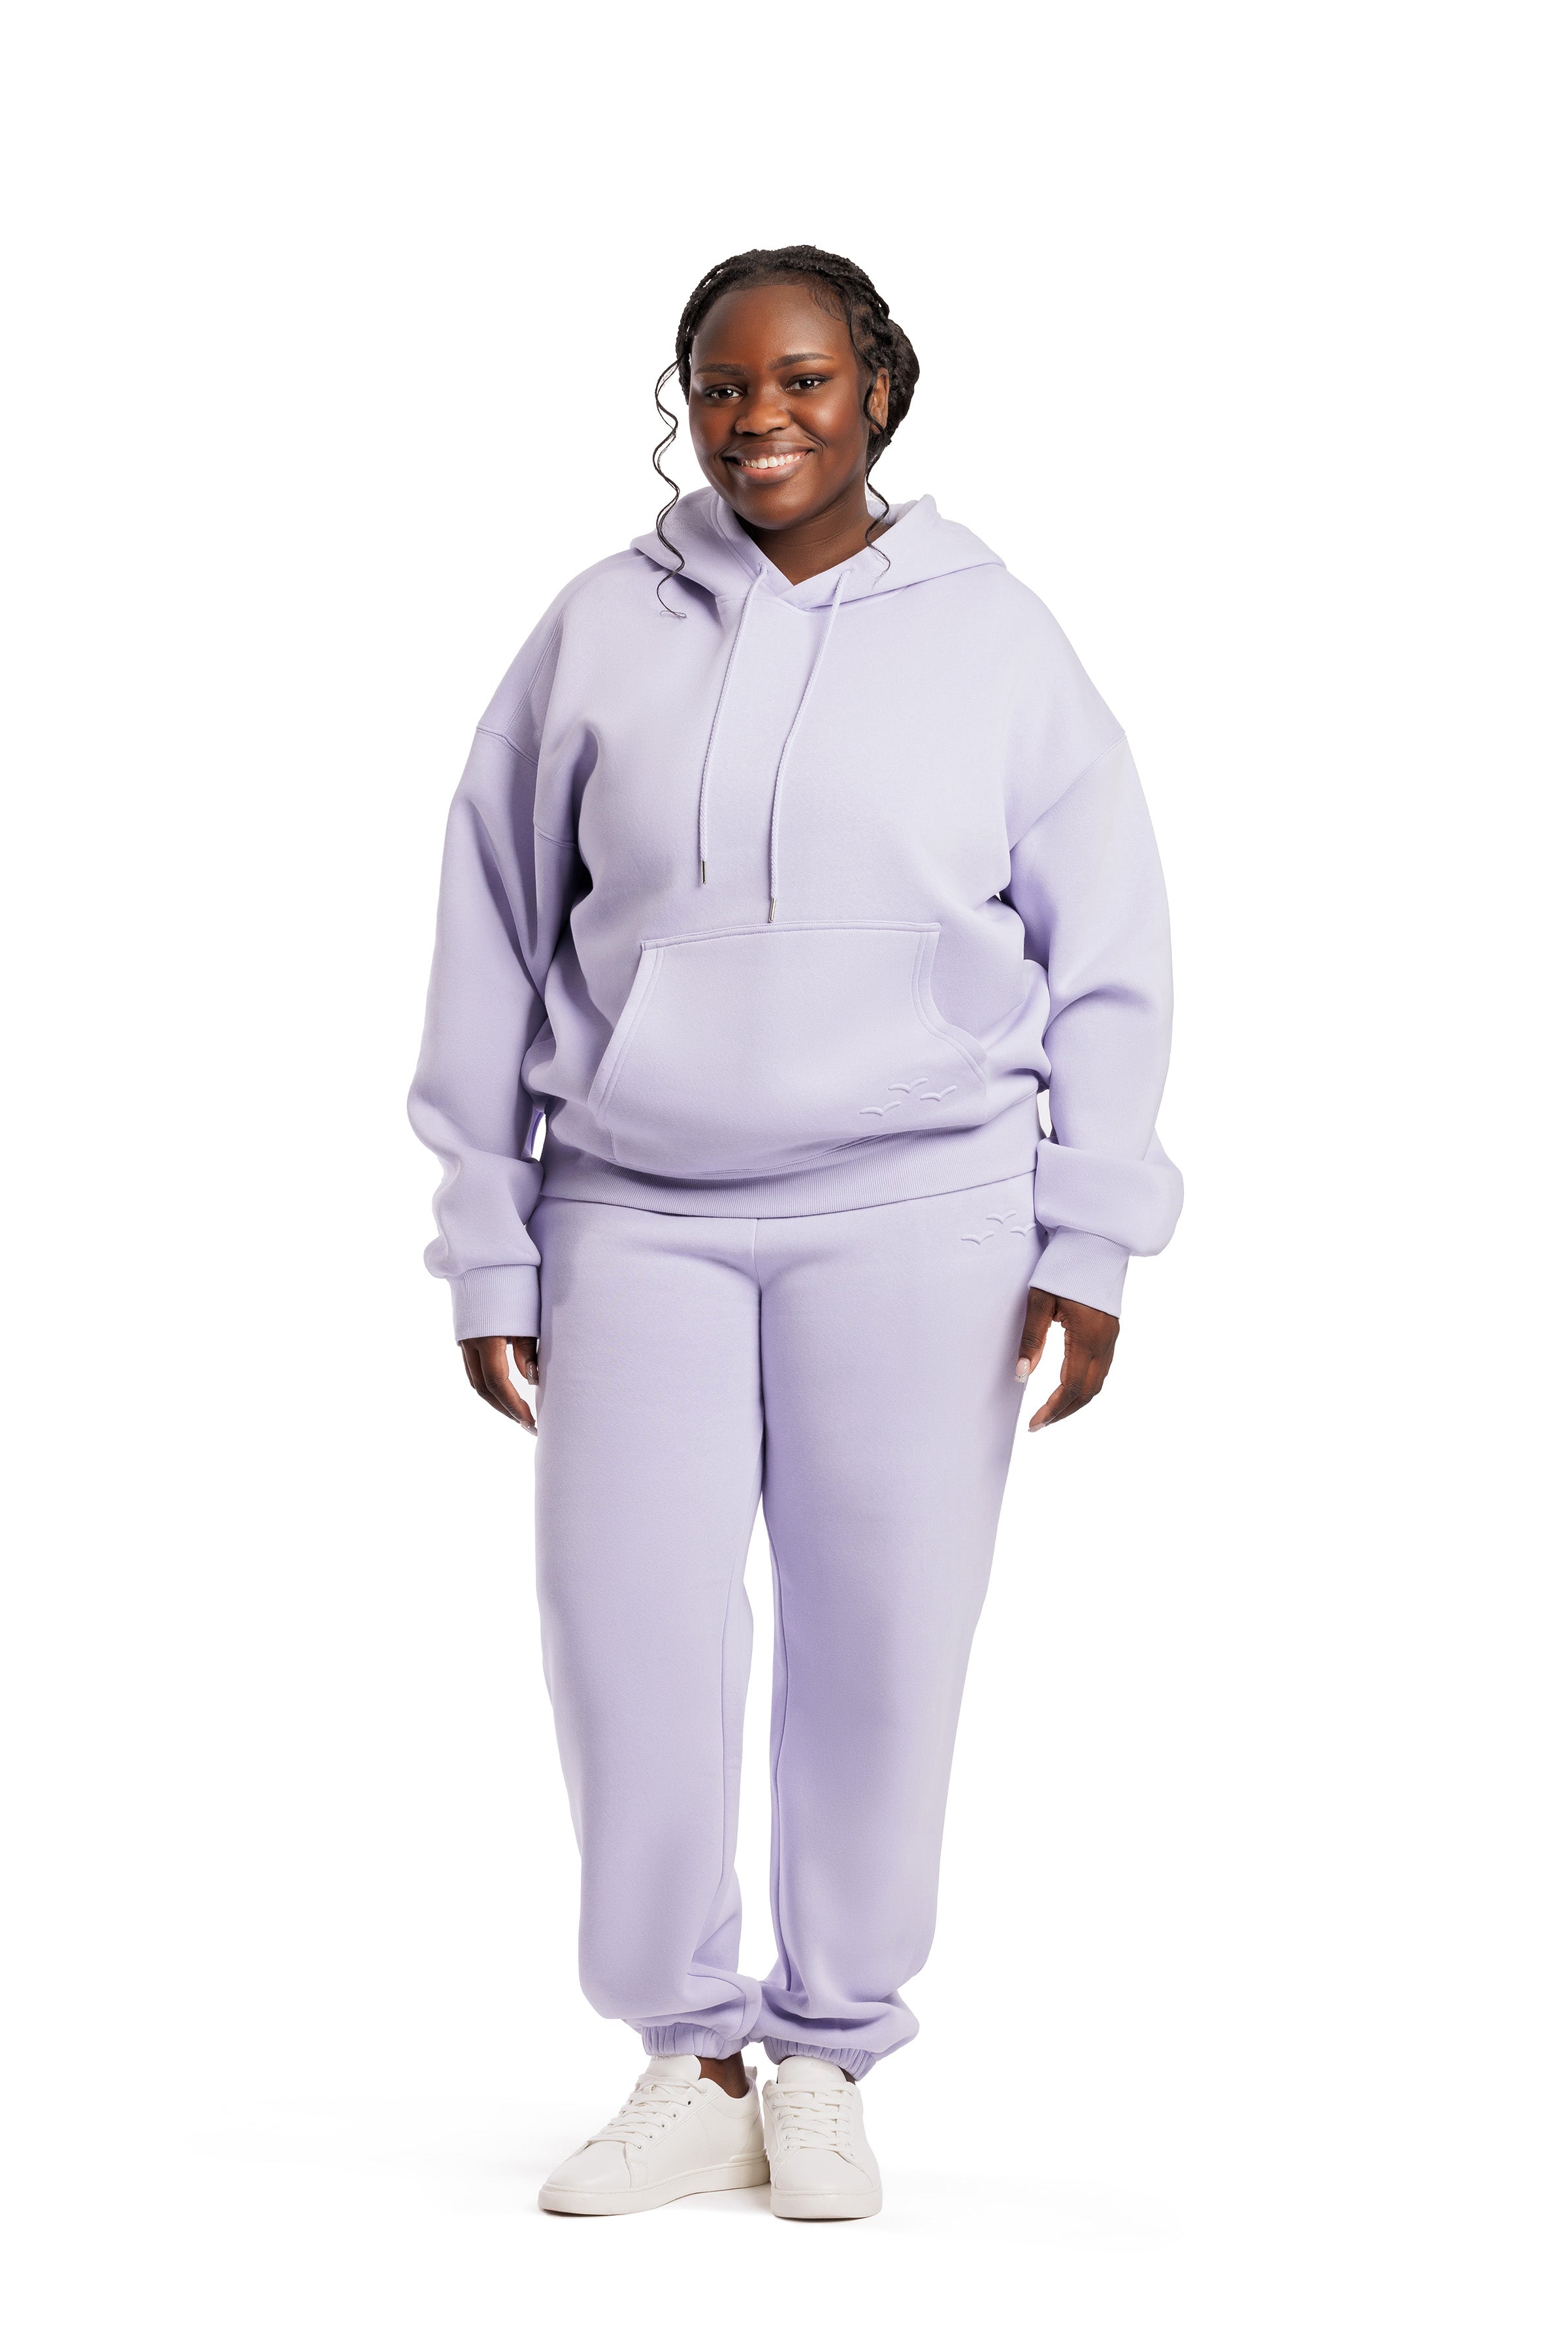 Women's tracksuit in lavender